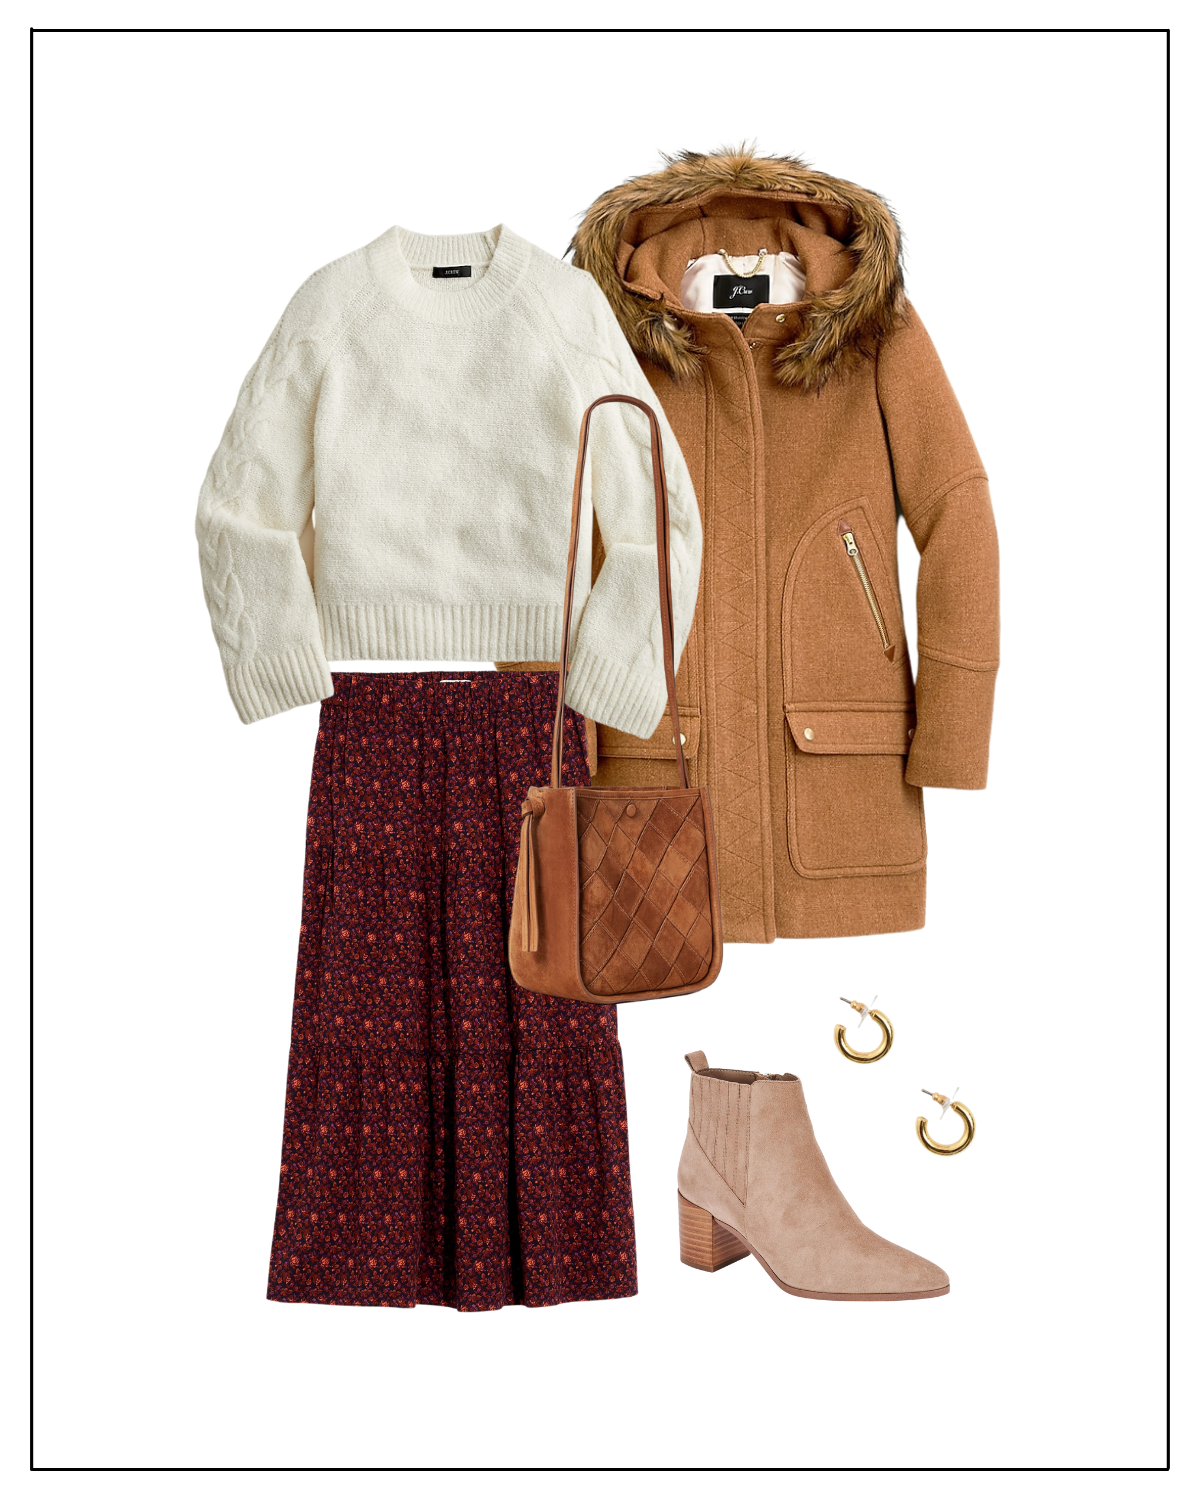 Winter Vacation Outfit Ideas - Evening Dinner